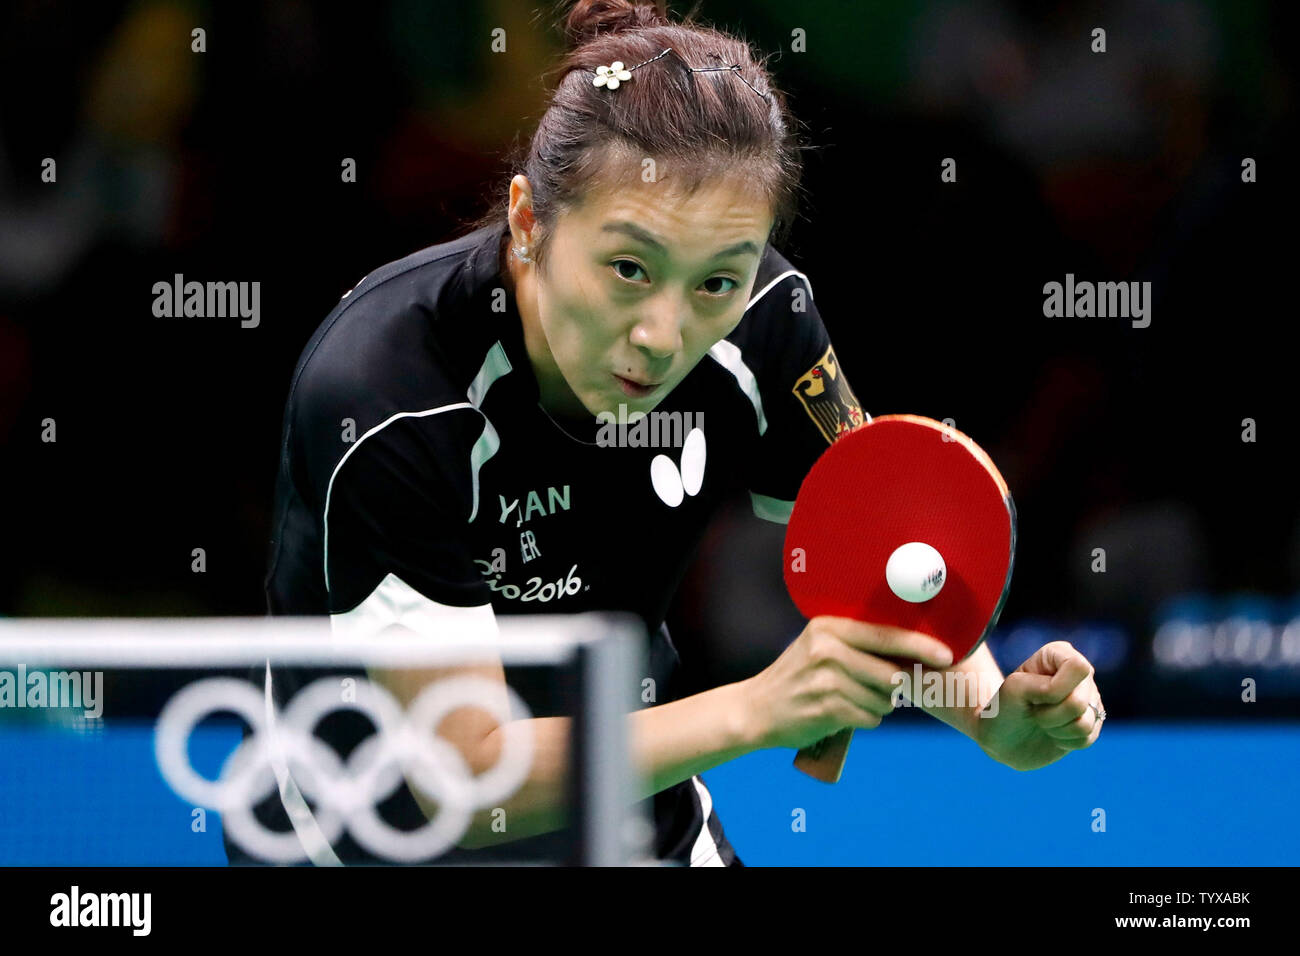 GermanyÕs Ying Han fires off a return in the Women's Team Table Tennis gold medal match against ChinaÕs Xiaoxia Li in Riocentro Pavilion 3 at the 2016 Rio Summer Olympics in Rio de Janeiro, Brazil, on August 16, 2016.   Photo by Matthew Healey/UPI Stock Photo